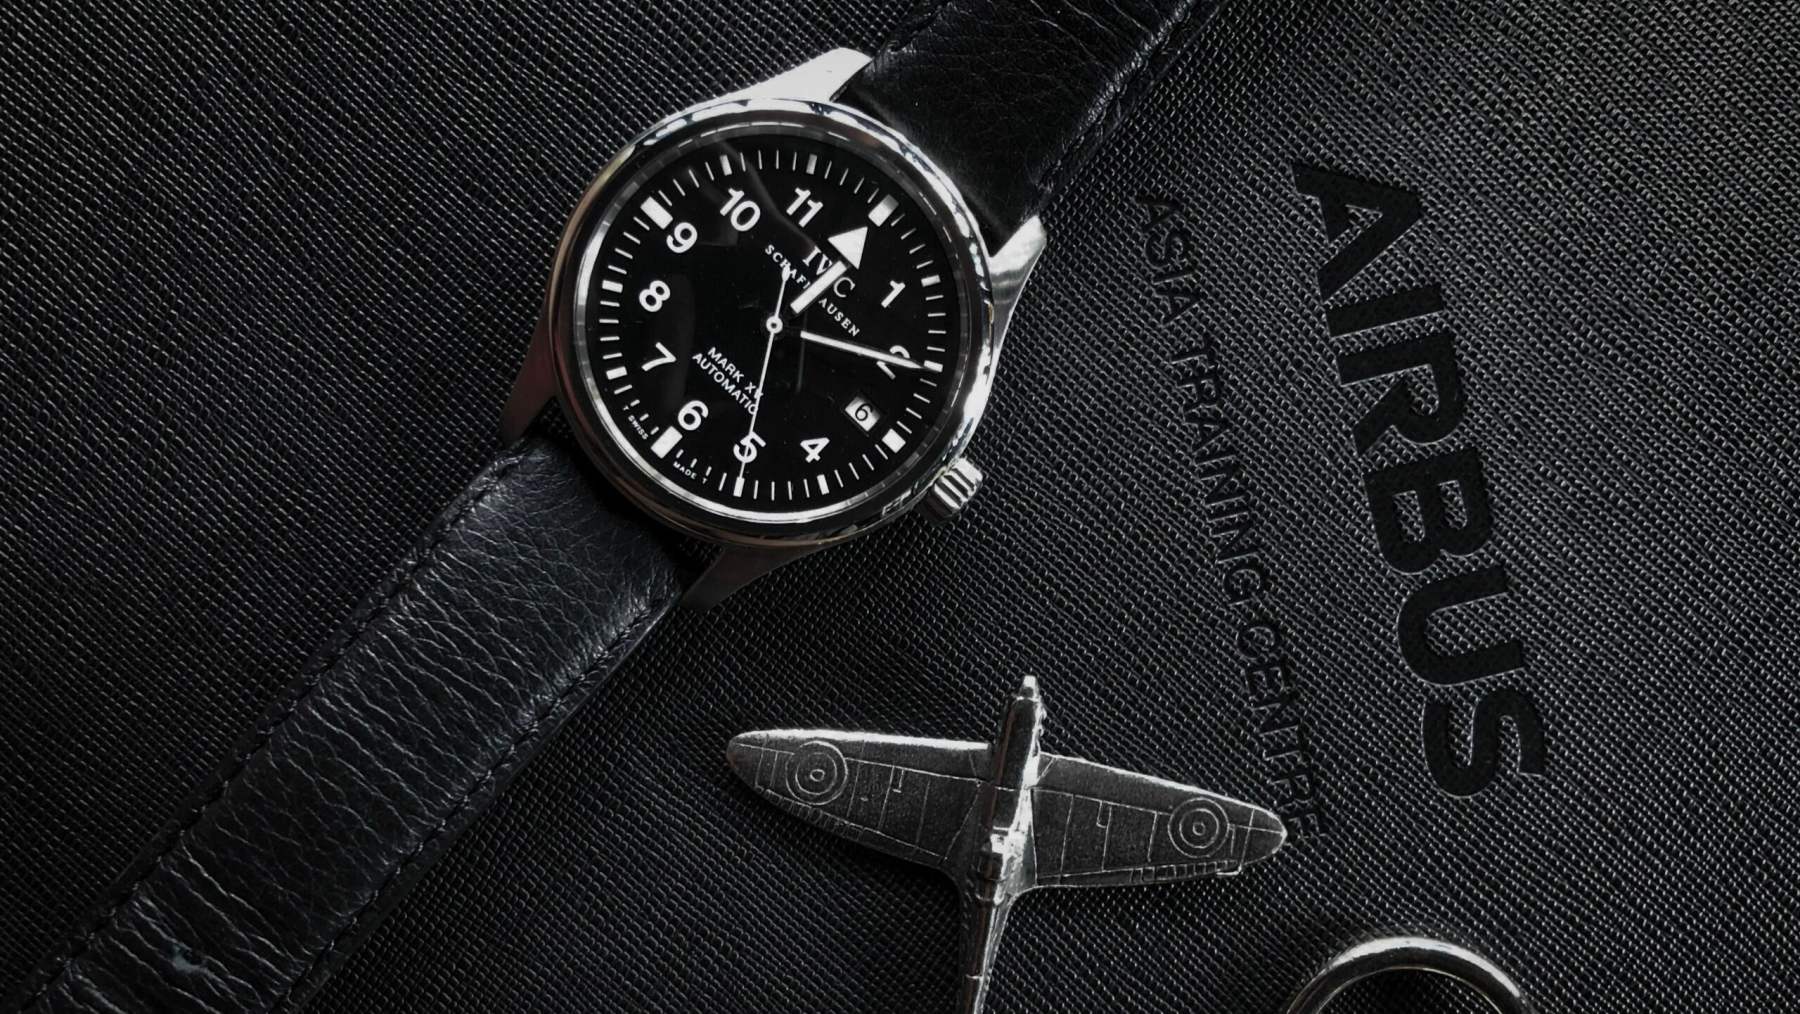 Fratelli Stories: An IWC Mark XV Pilot’s Watch Fit For A Flyer